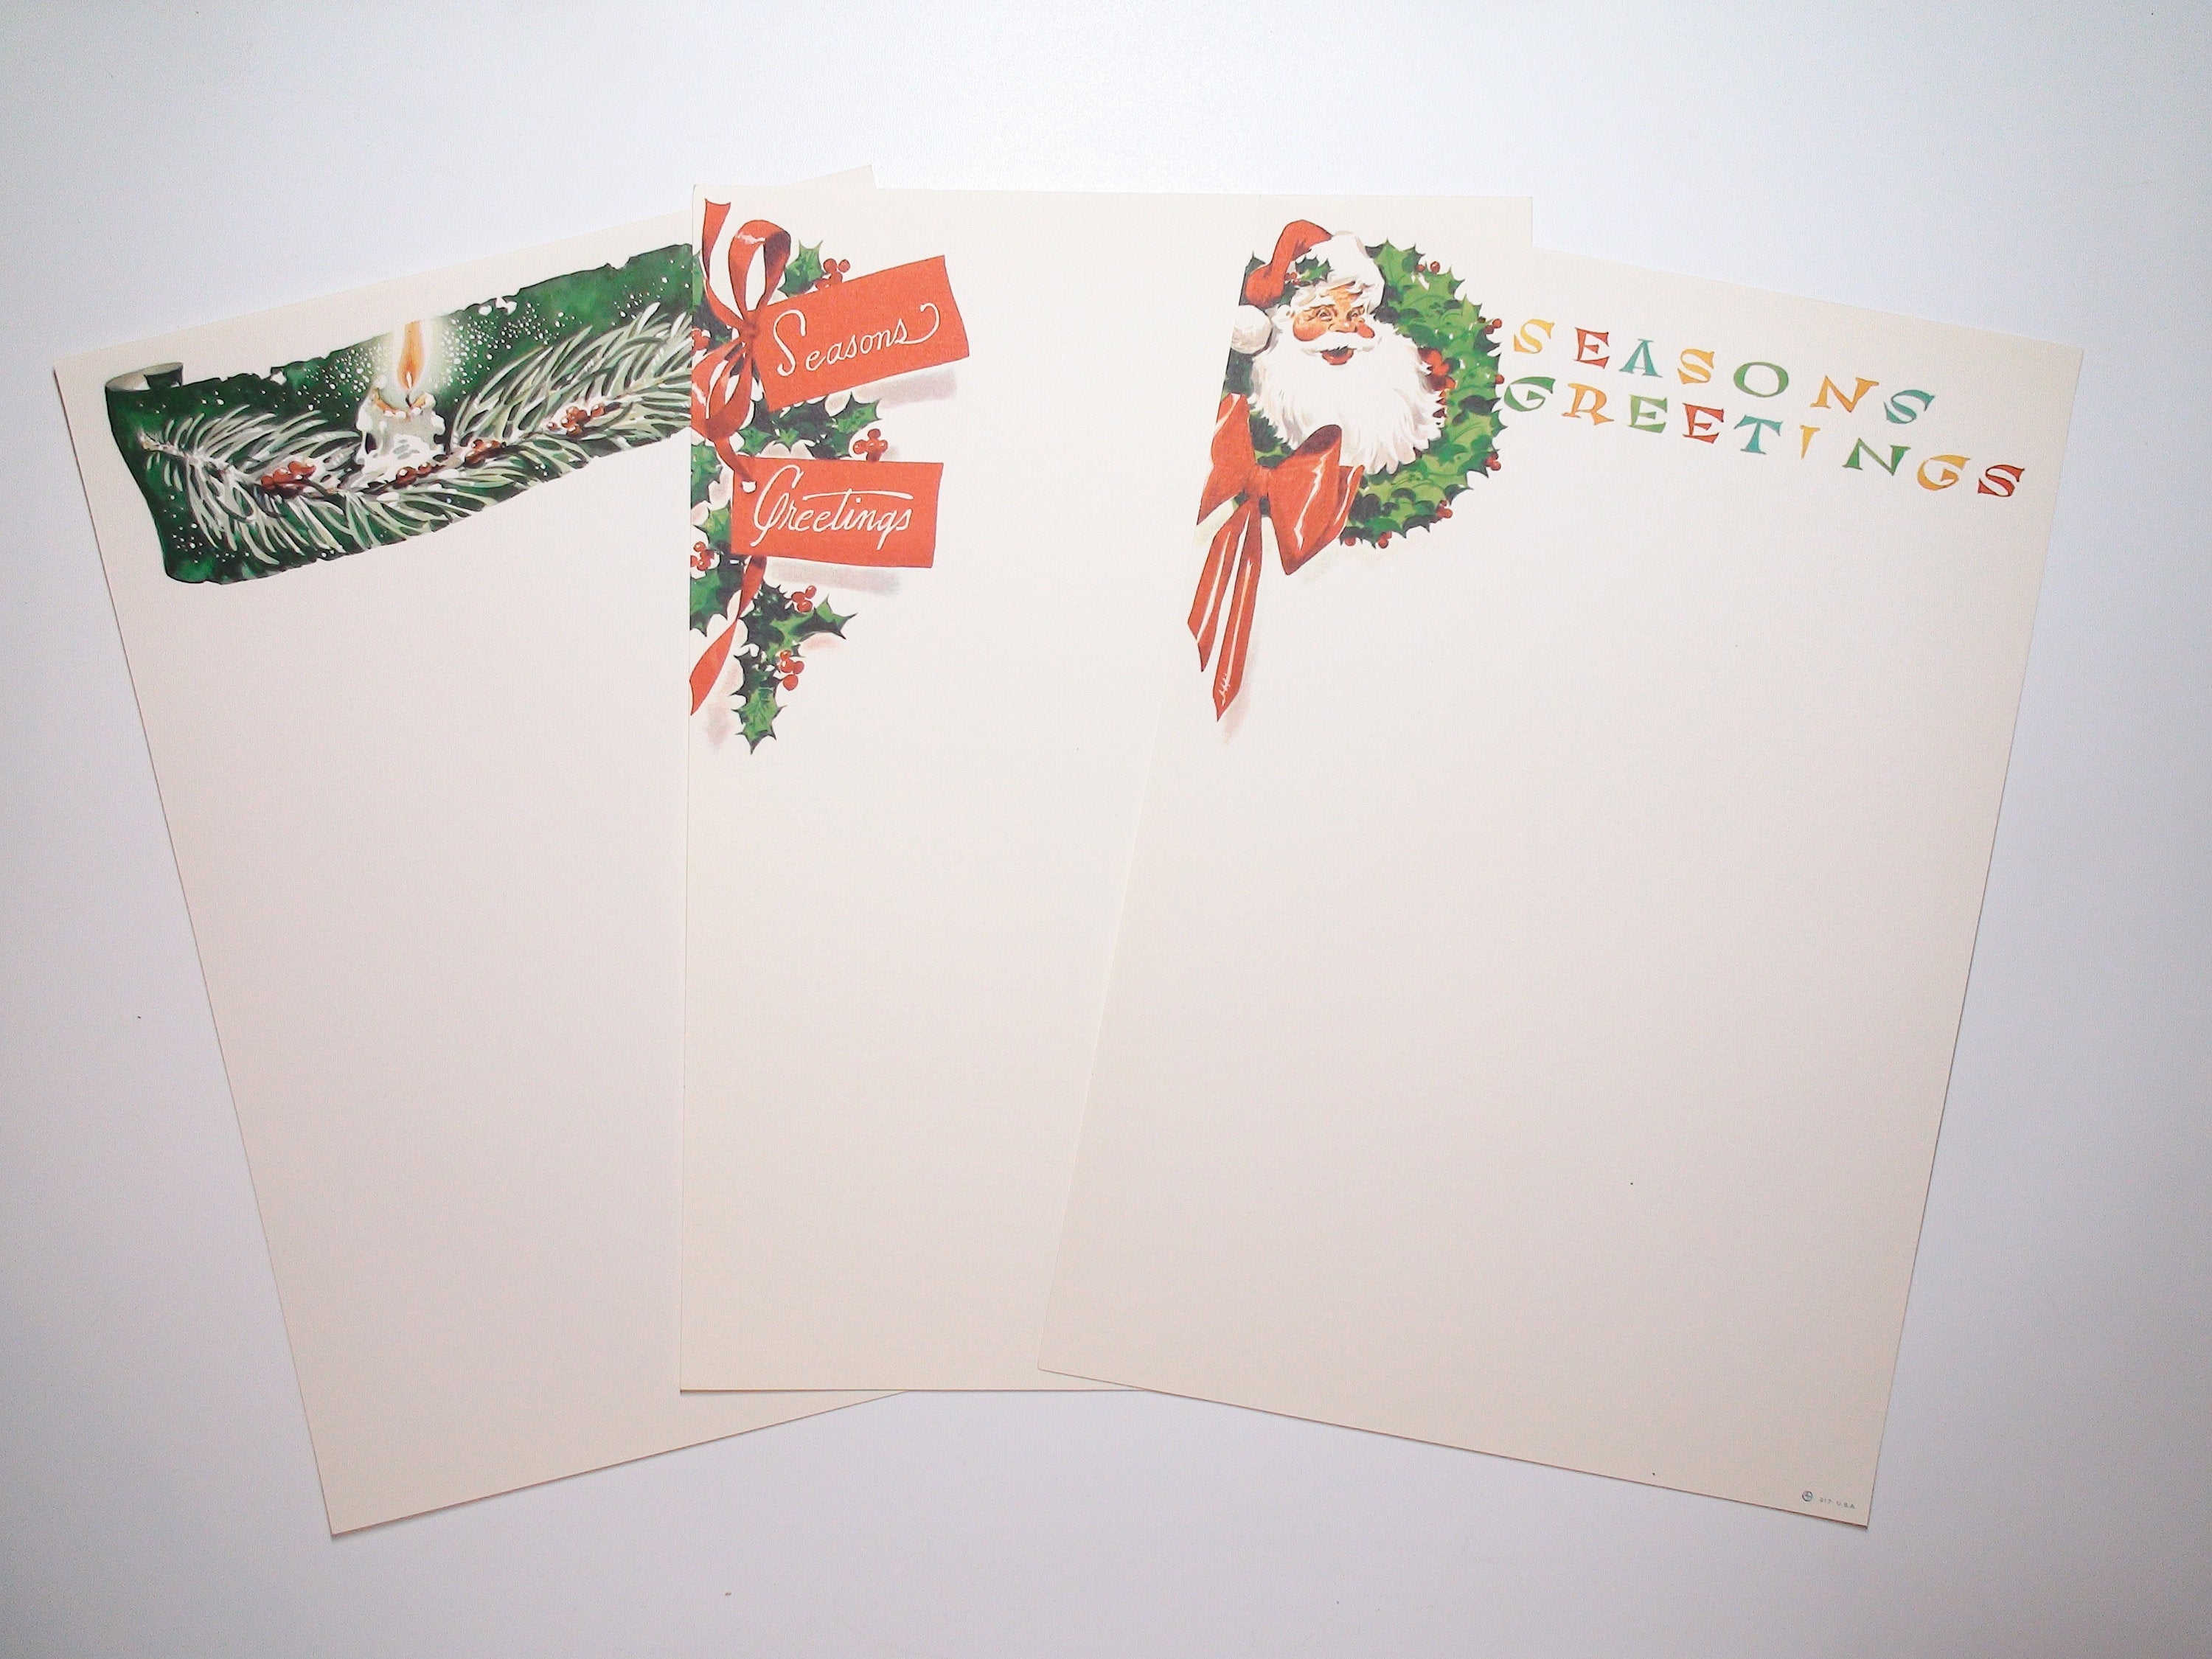 20 Sheets of Vintage Christmas Holiday Border Stationery/Letterhead for Notes and Letters, Gilt Accents, c1950s-60s